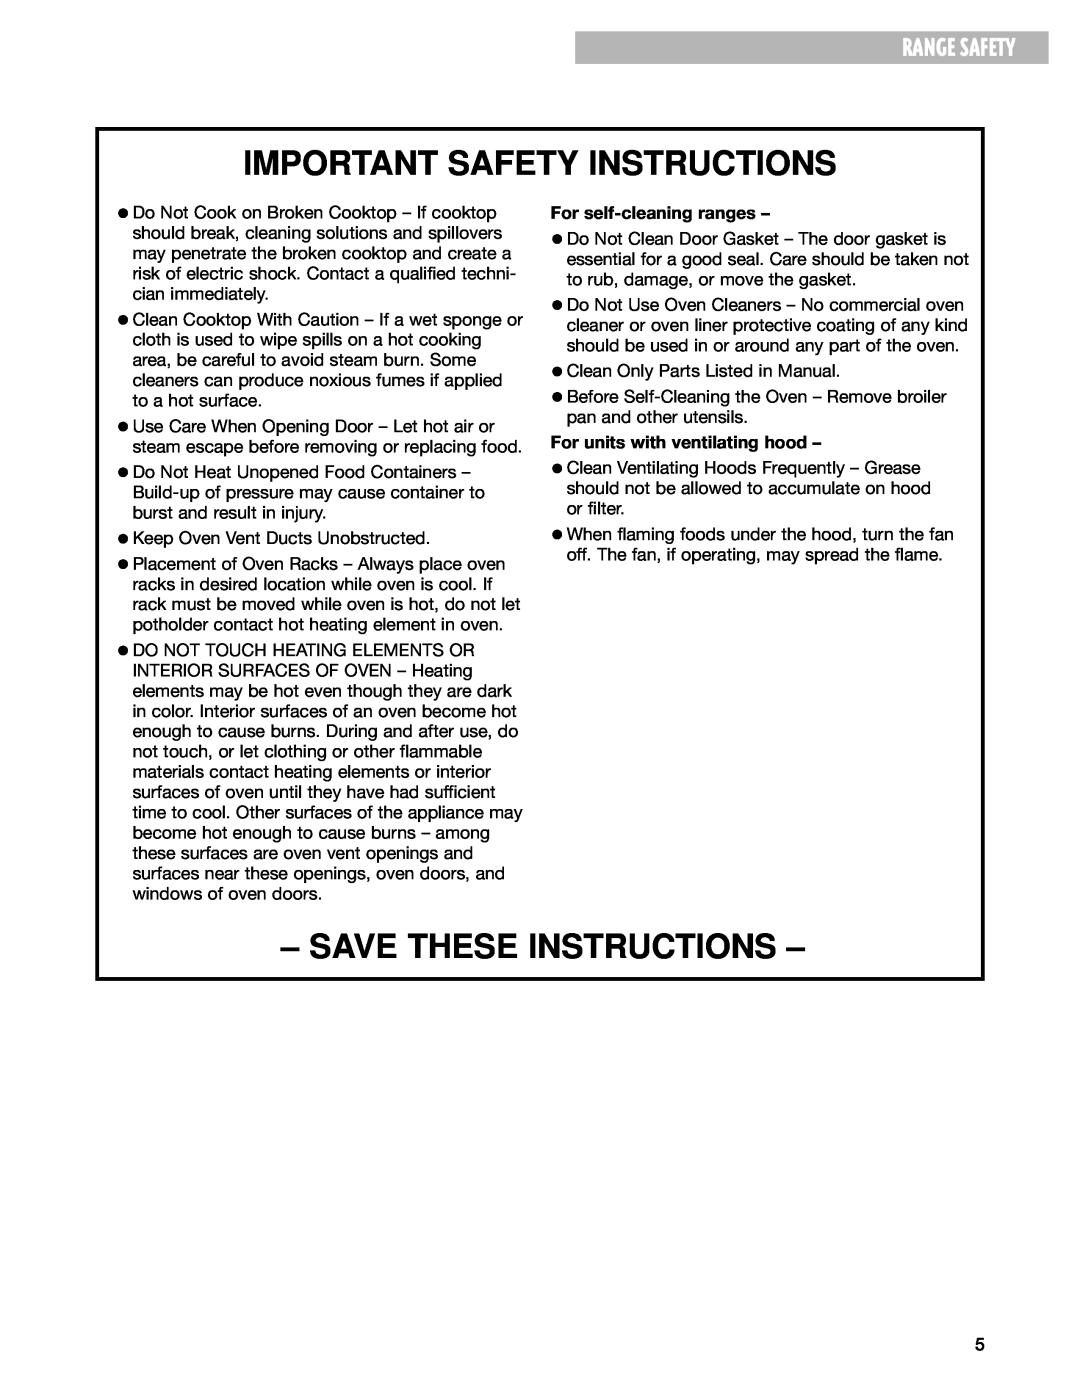 Whirlpool RF314PXG manual Important Safety Instructions, Save These Instructions, Range Safety, For self-cleaning ranges 